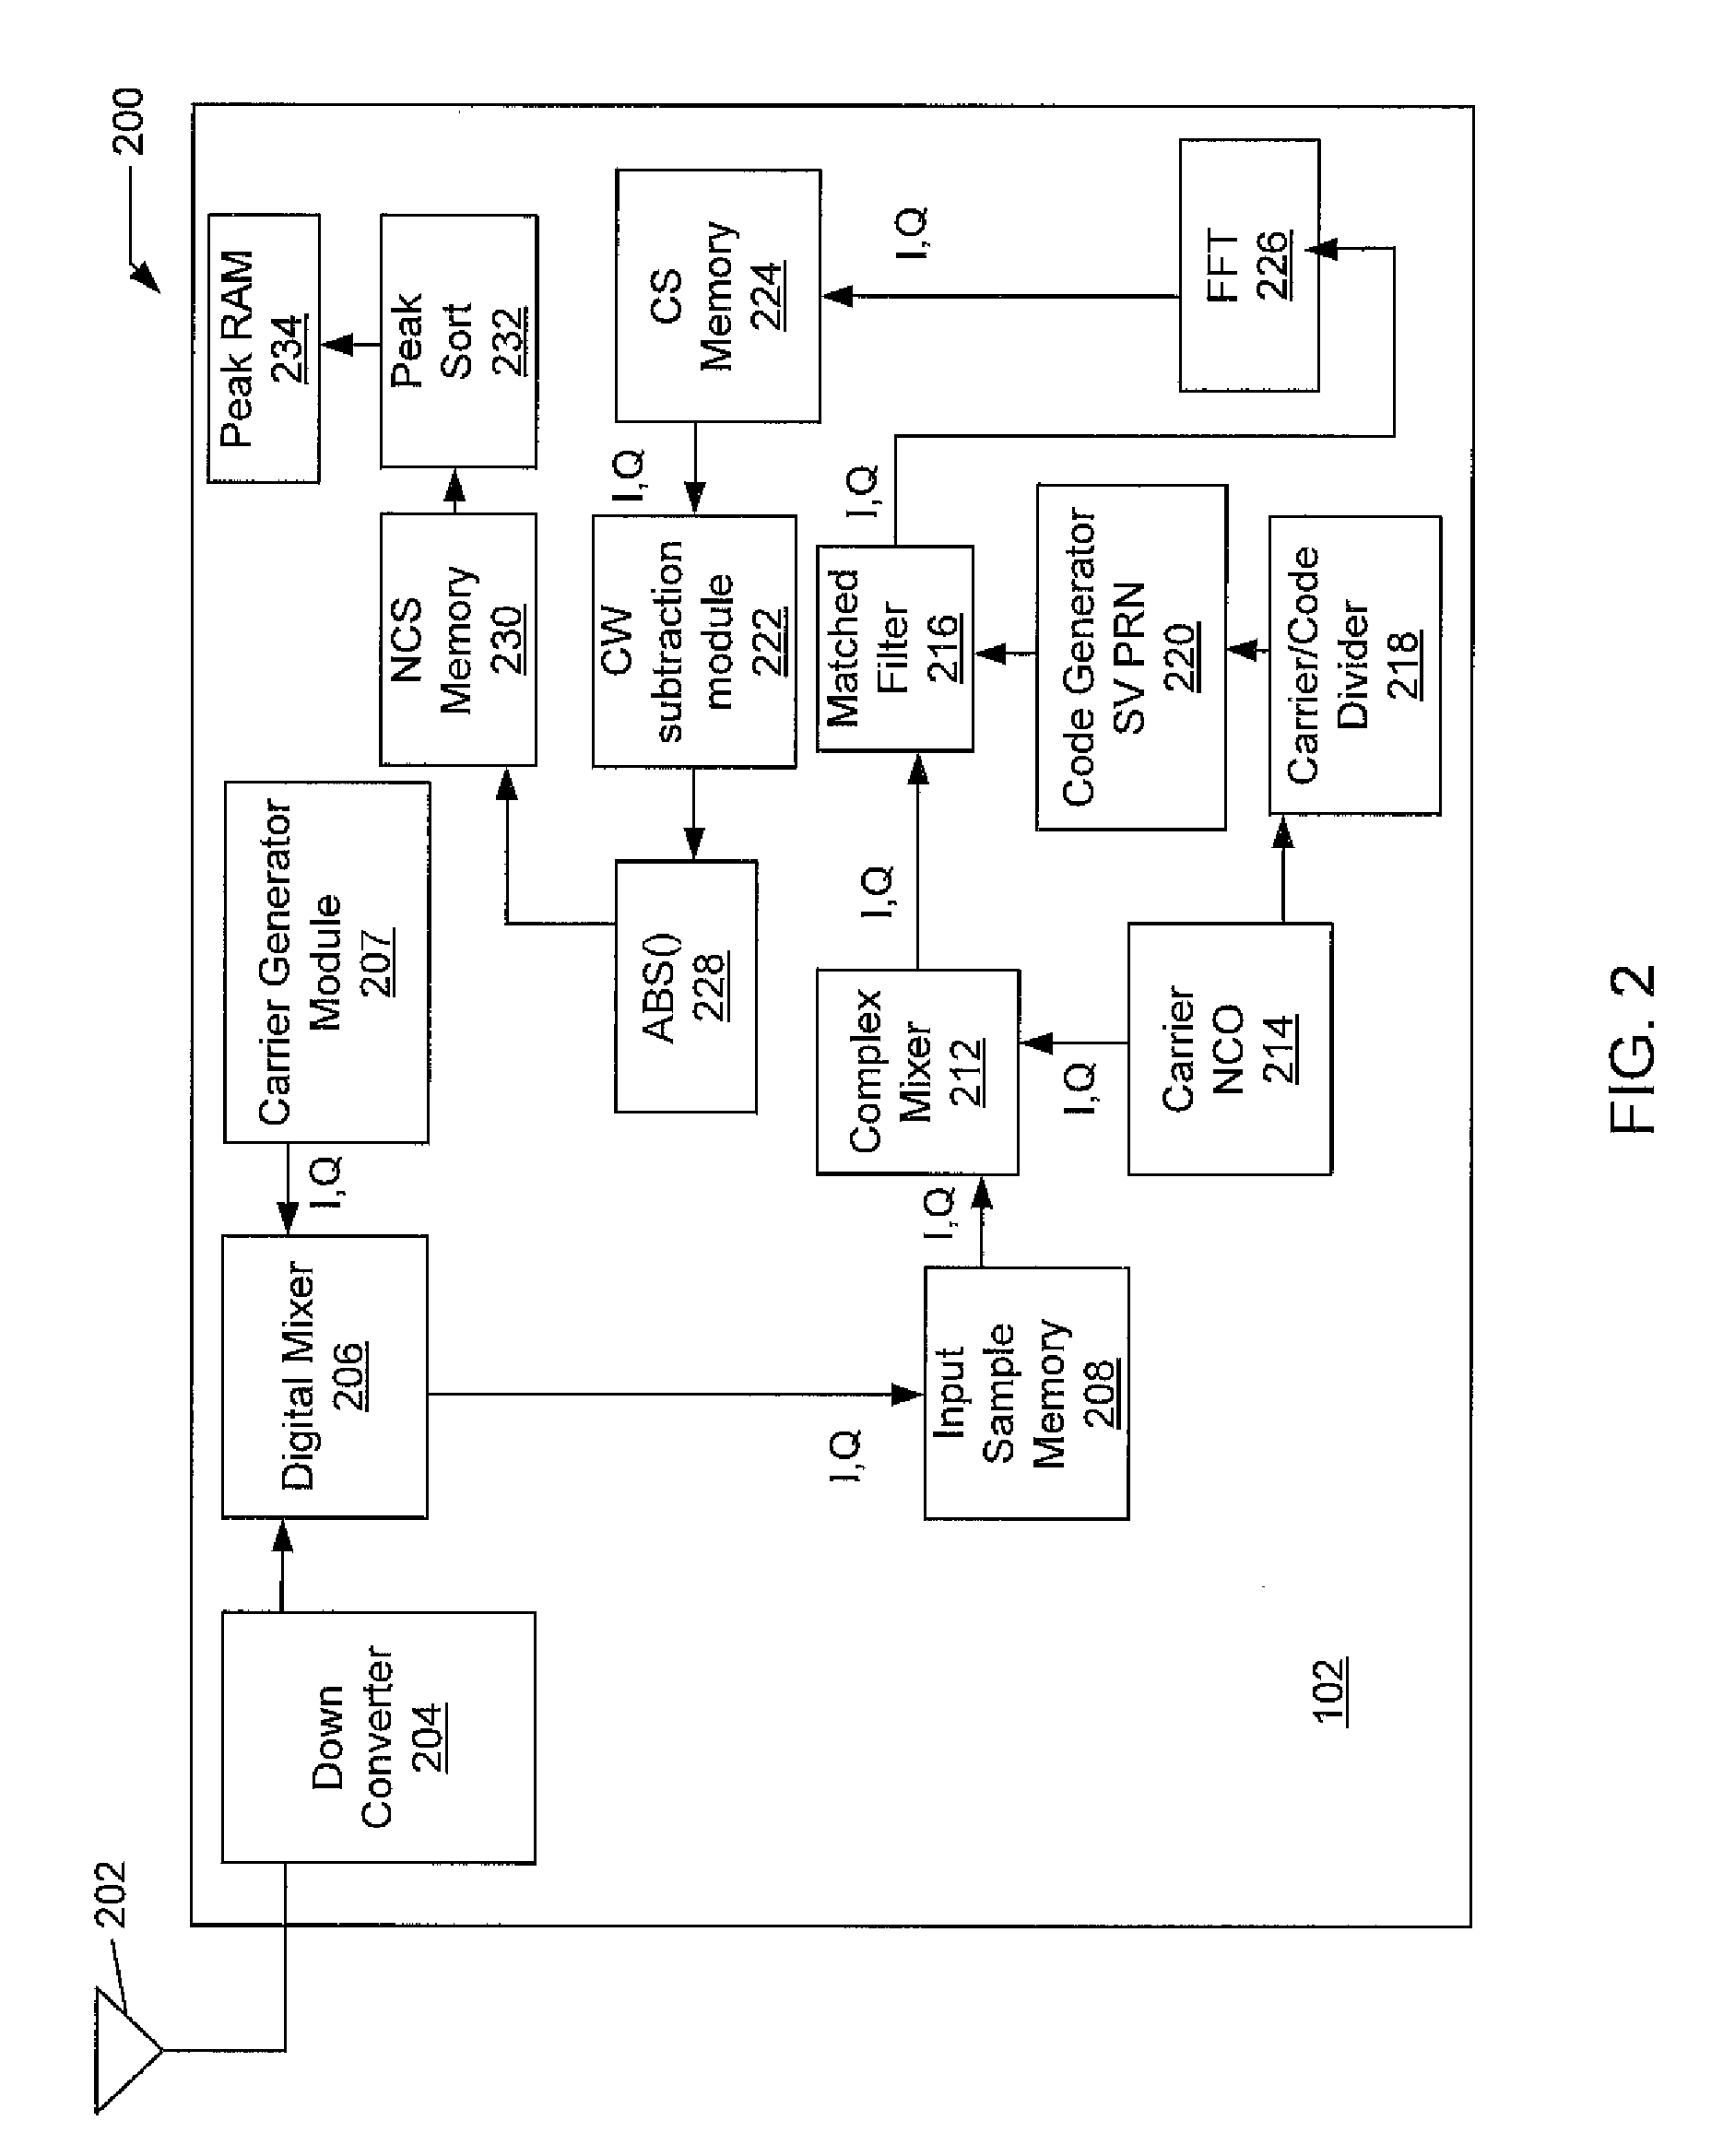 Method and Apparatus for Mitigating the Effects of CW Interference Via Post Correlation Processing in a GPS Receiver